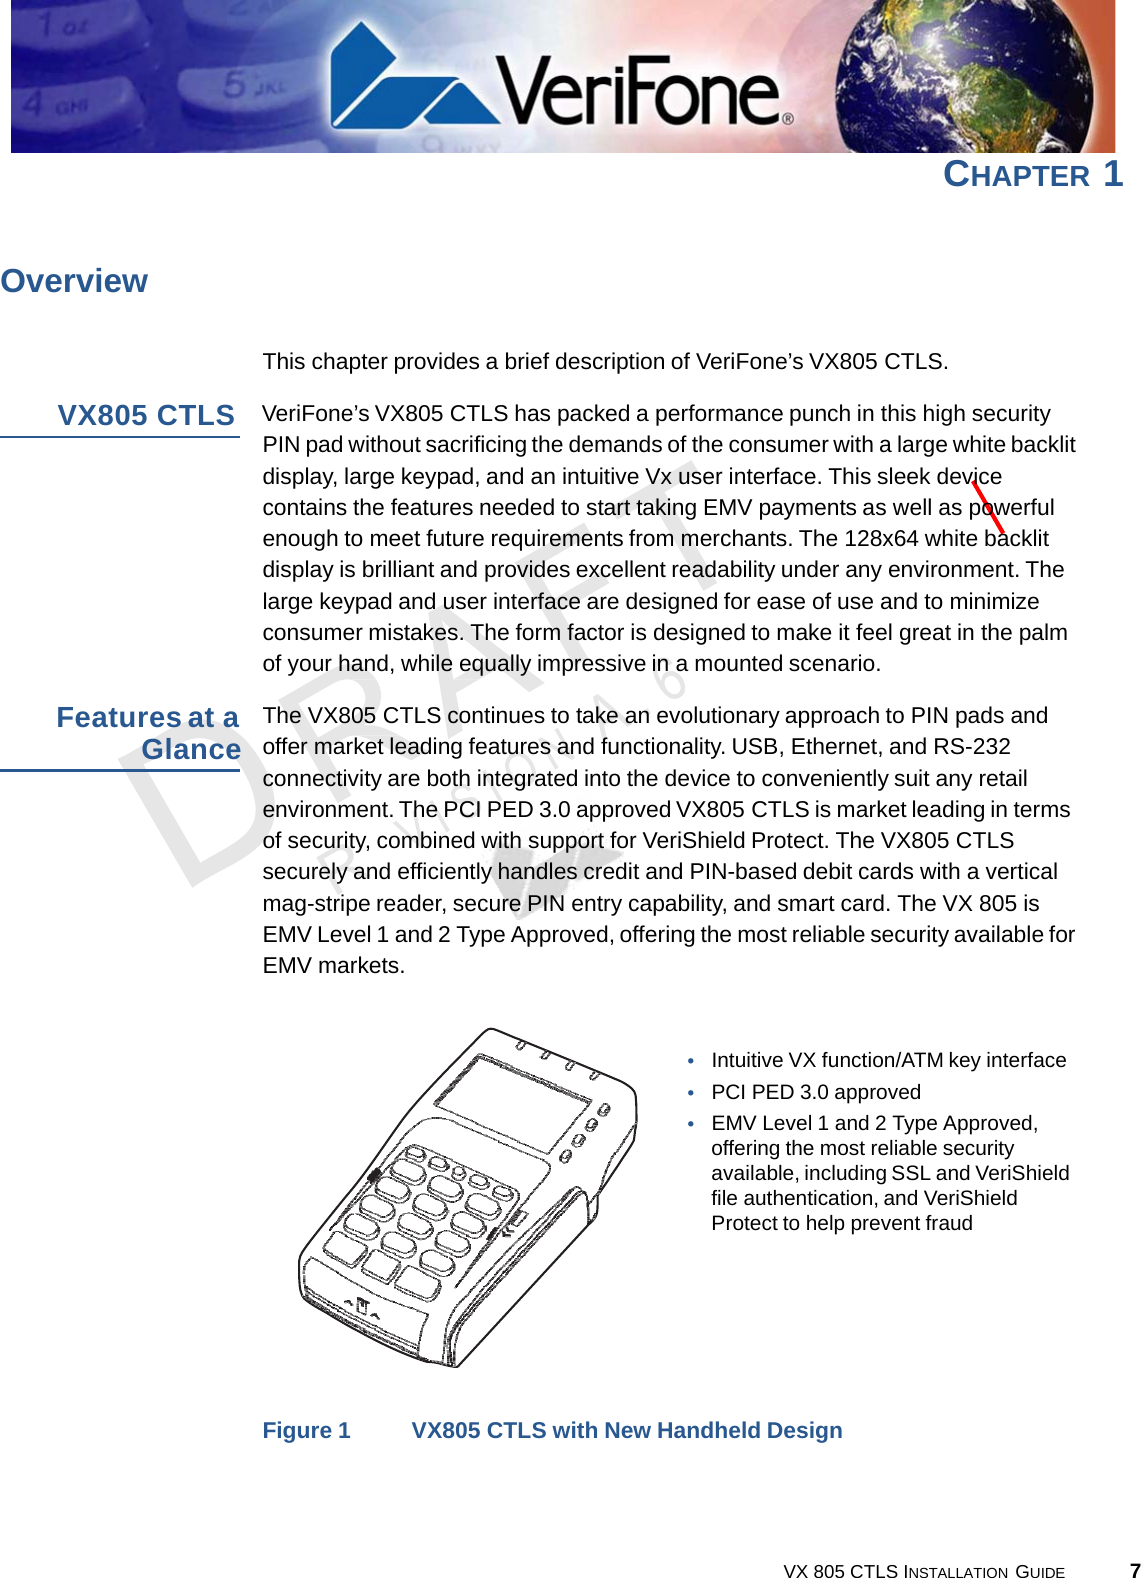 CHAPTER 17VX 805 CTLS INSTALLATION  GUIDE     Overview   This chapter provides a brief description of VeriFone’s VX805 CTLS.  VX805 CTLS  VeriFone’s VX805 CTLS has packed a performance punch in this high security PIN pad without sacrificing the demands of the consumer with a large white backlit display, large keypad, and an intuitive Vx user interface. This sleek device contains the features needed to start taking EMV payments as well as powerful enough to meet future requirements from merchants. The 128x64 white backlit display is brilliant and provides excellent readability under any environment. The large keypad and user interface are designed for ease of use and to minimize consumer mistakes. The form factor is designed to make it feel great in the palm of your hand, while equally impressive in a mounted scenario.  Features at a Glance The VX805 CTLS continues to take an evolutionary approach to PIN pads and offer market leading features and functionality. USB, Ethernet, and RS-232 connectivity are both integrated into the device to conveniently suit any retail environment. The PCI PED 3.0 approved VX805 CTLS is market leading in terms of security, combined with support for VeriShield Protect. The VX805 CTLS securely and efficiently handles credit and PIN-based debit cards with a vertical mag-stripe reader, secure PIN entry capability, and smart card. The VX 805 is EMV Level 1 and 2 Type Approved, offering the most reliable security available for EMV markets.    •   Intuitive VX function/ATM key interface •   PCI PED 3.0 approved •   EMV Level 1 and 2 Type Approved, offering the most reliable security available, including SSL and VeriShield file authentication, and VeriShield Protect to help prevent fraud          Figure 1  VX805 CTLS with New Handheld Design 